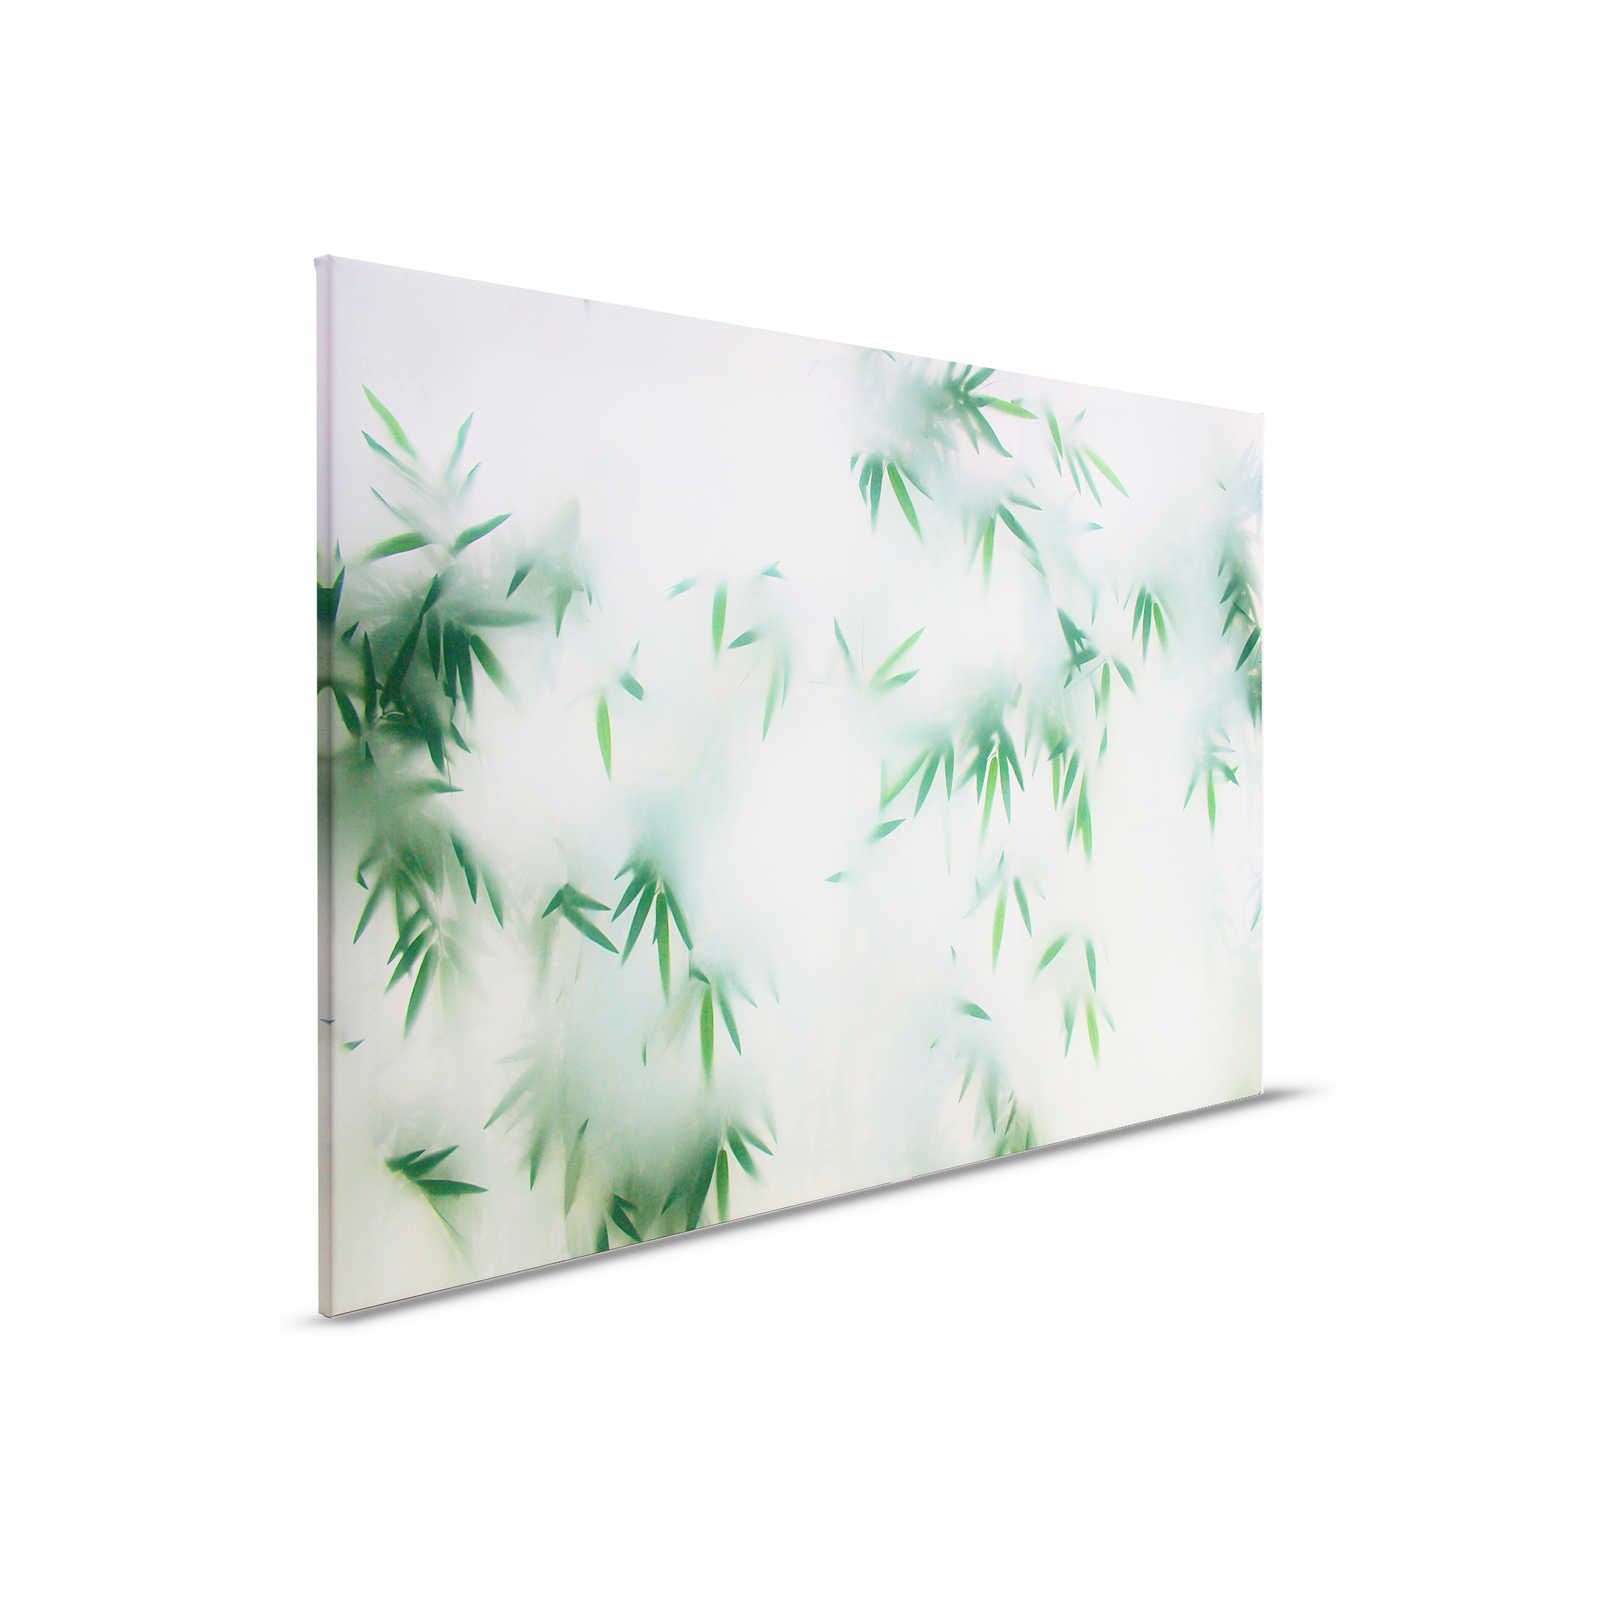         Panda Paradise 3 - Leaves Canvas painting Bamboo in the mist - 0.90 m x 0.60 m
    